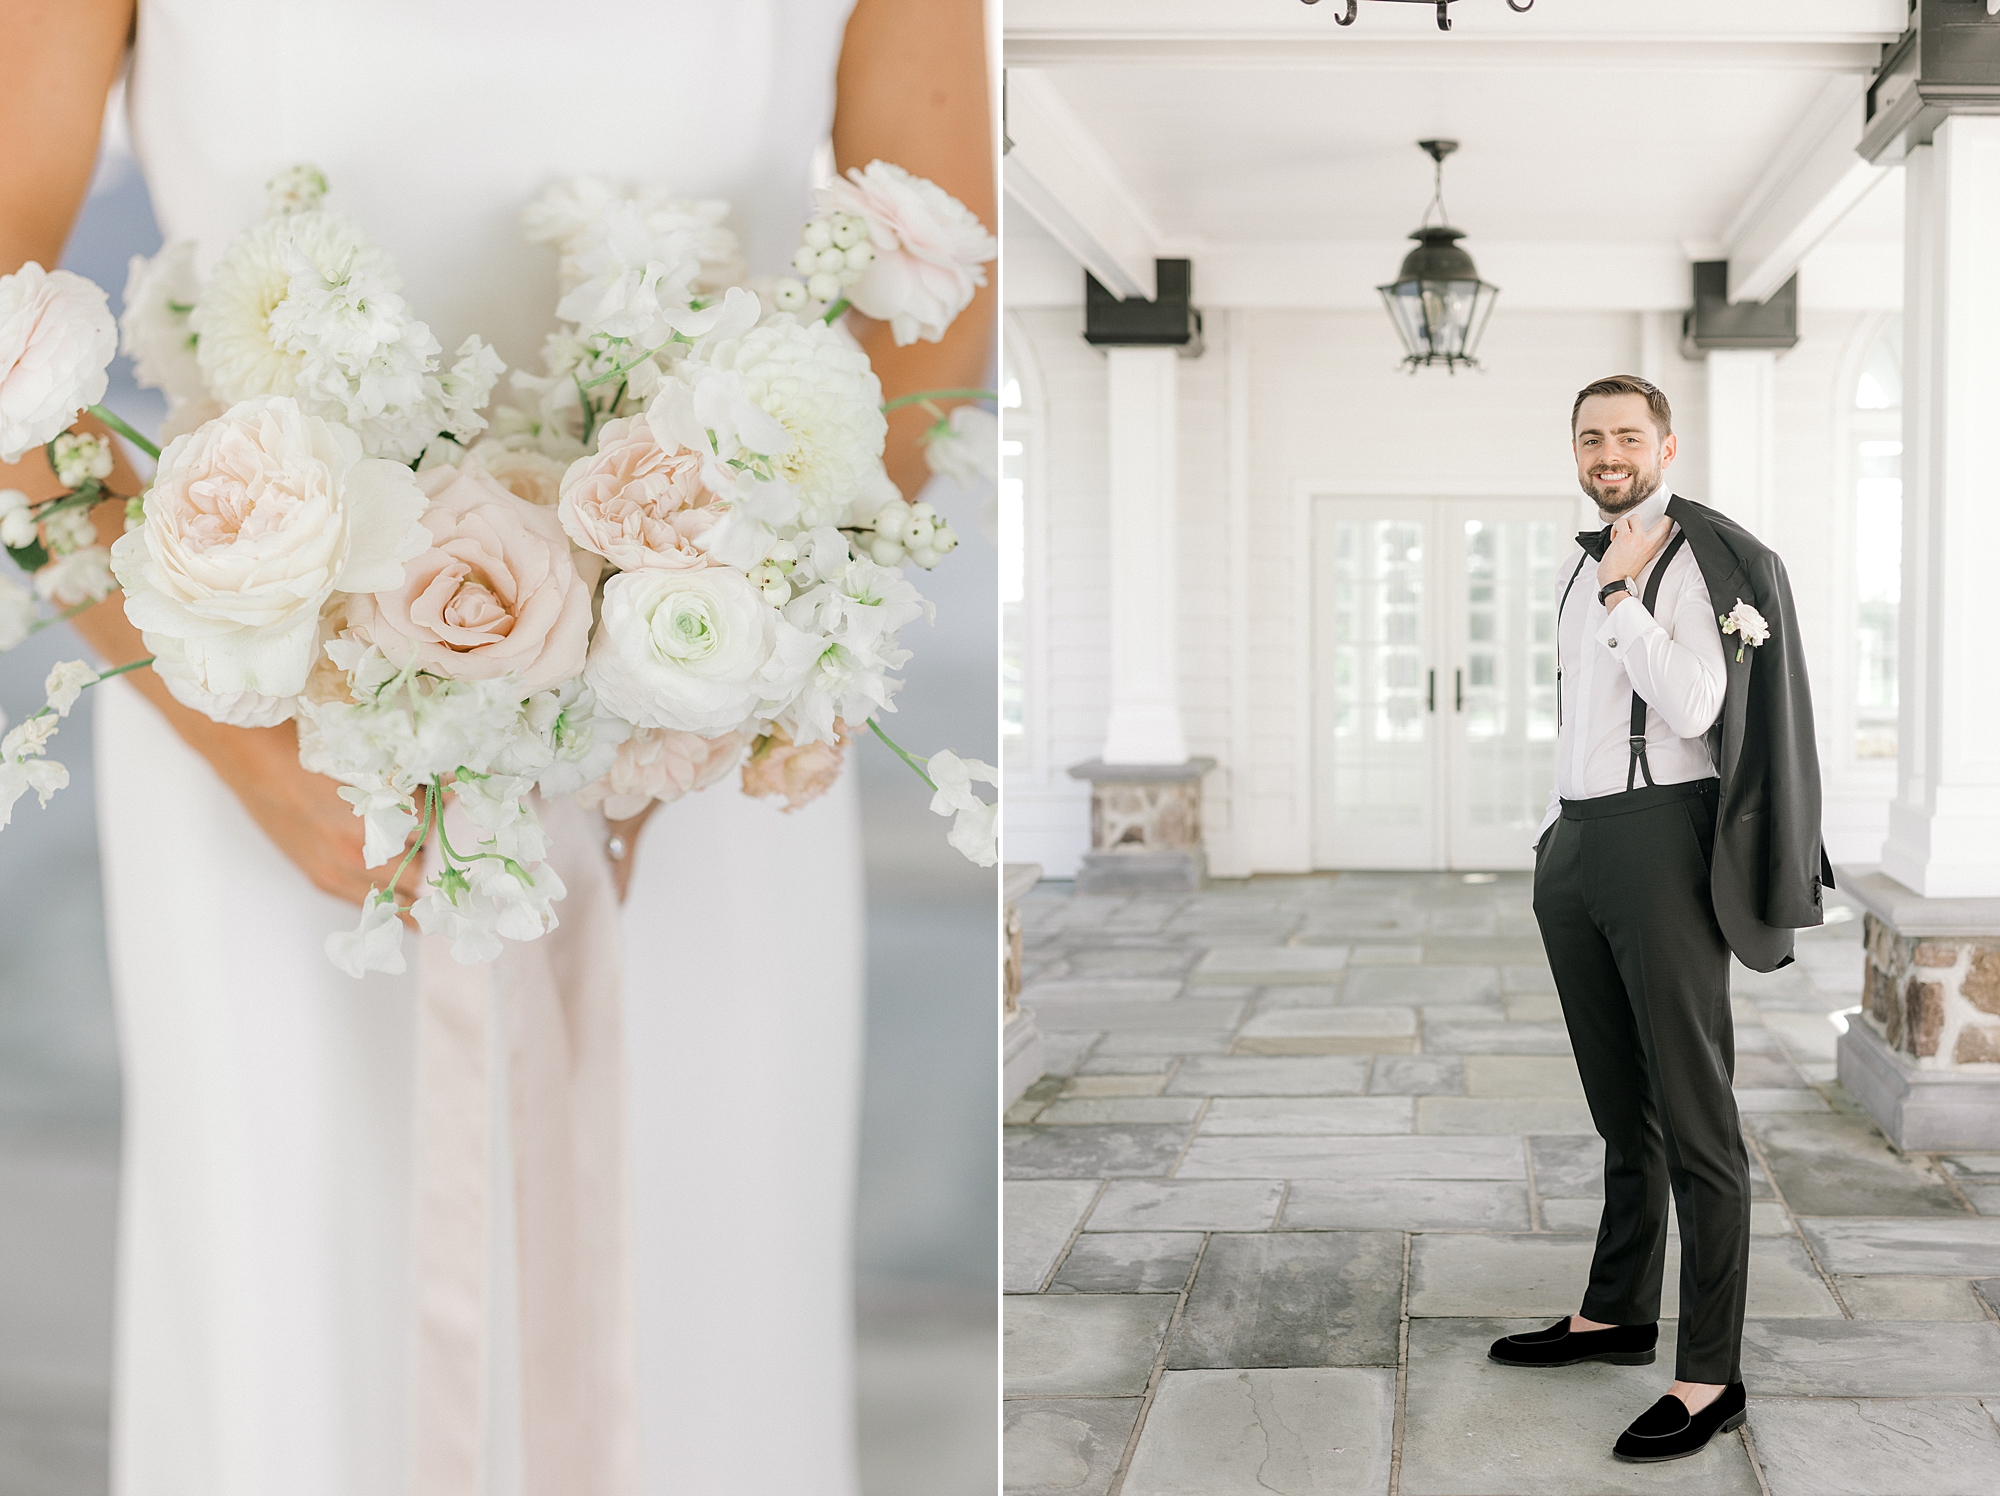 bride holds bouquet of white and pink flowers in front of wedding dress while groom stands with tux jacket over shoulder